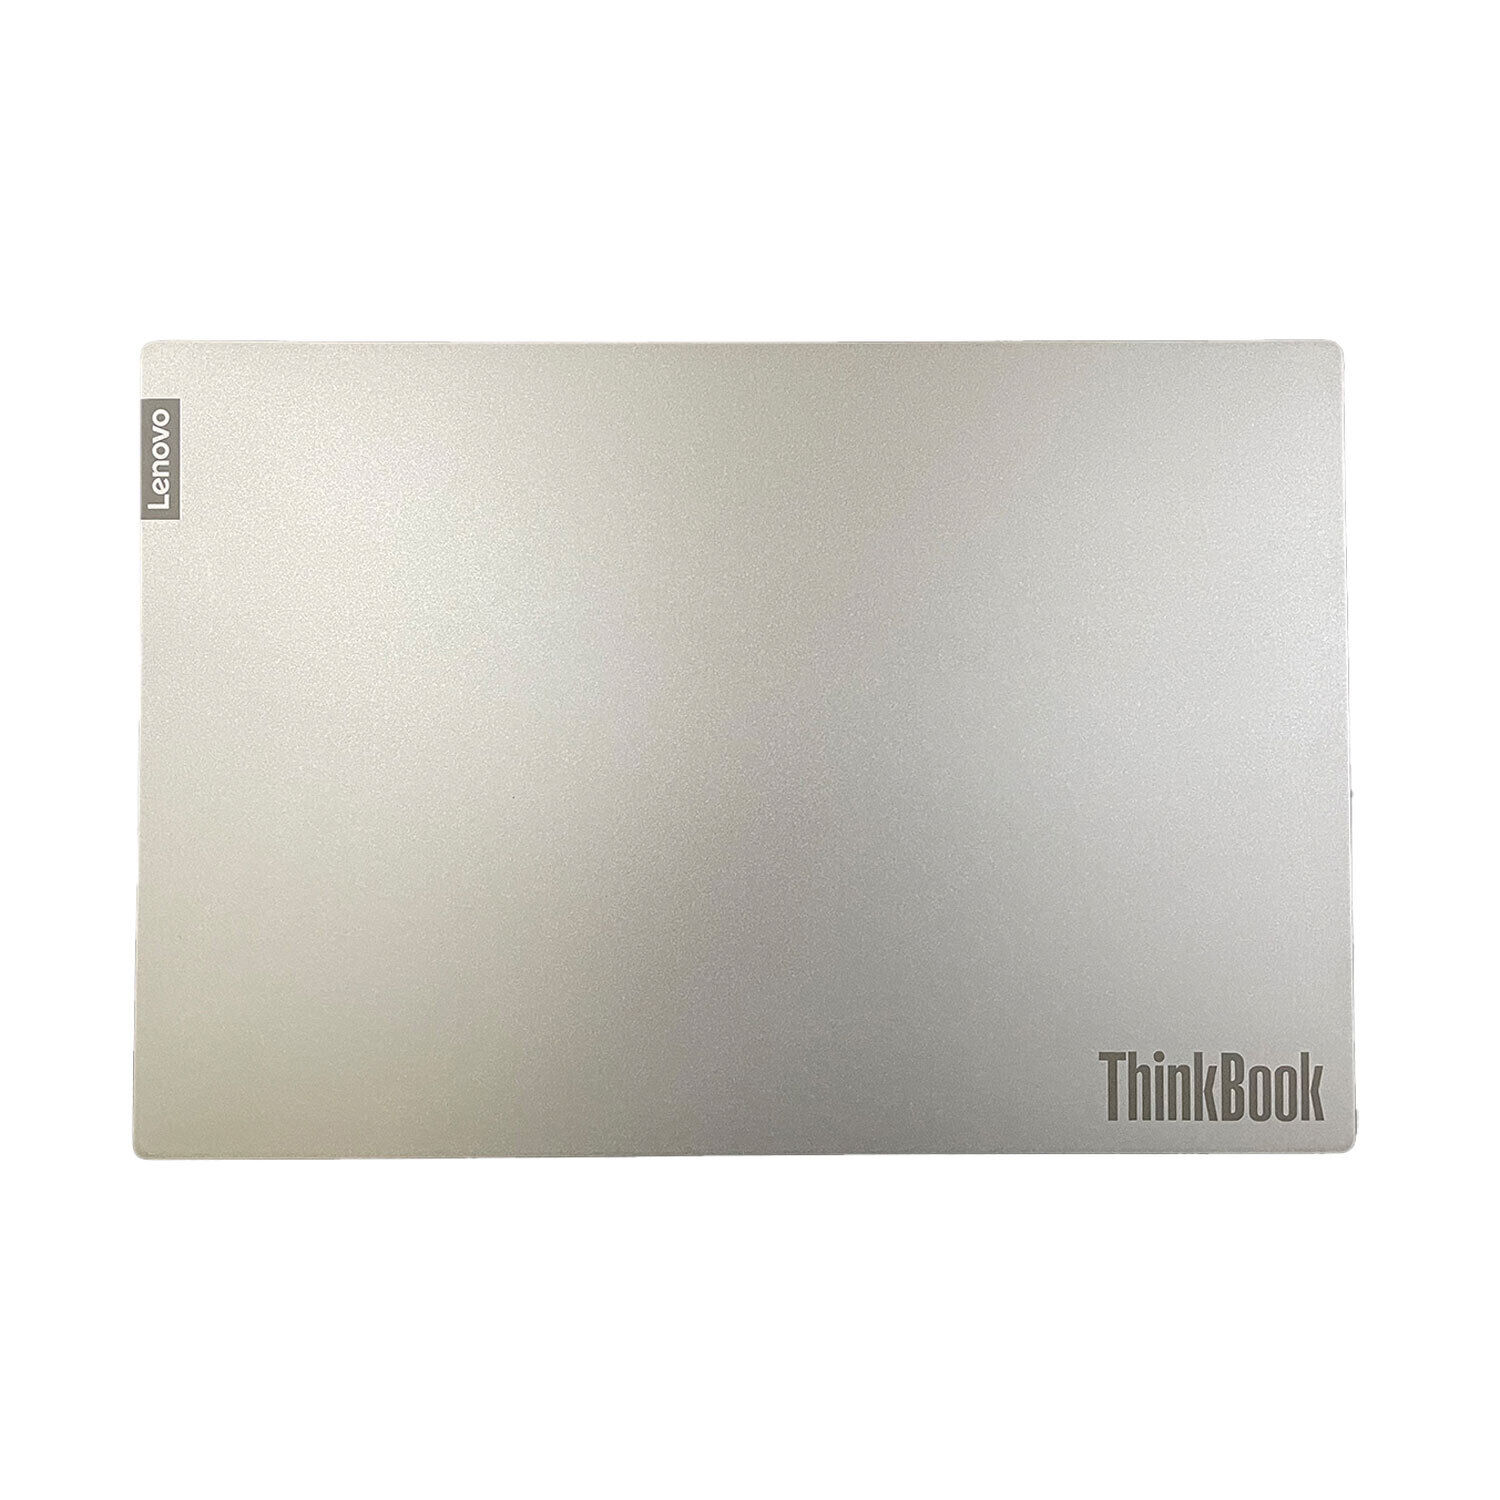 New For Lenovo ThinkBook 15IIL 15IML LCD Back Cover Rear Lid Top Case Silver